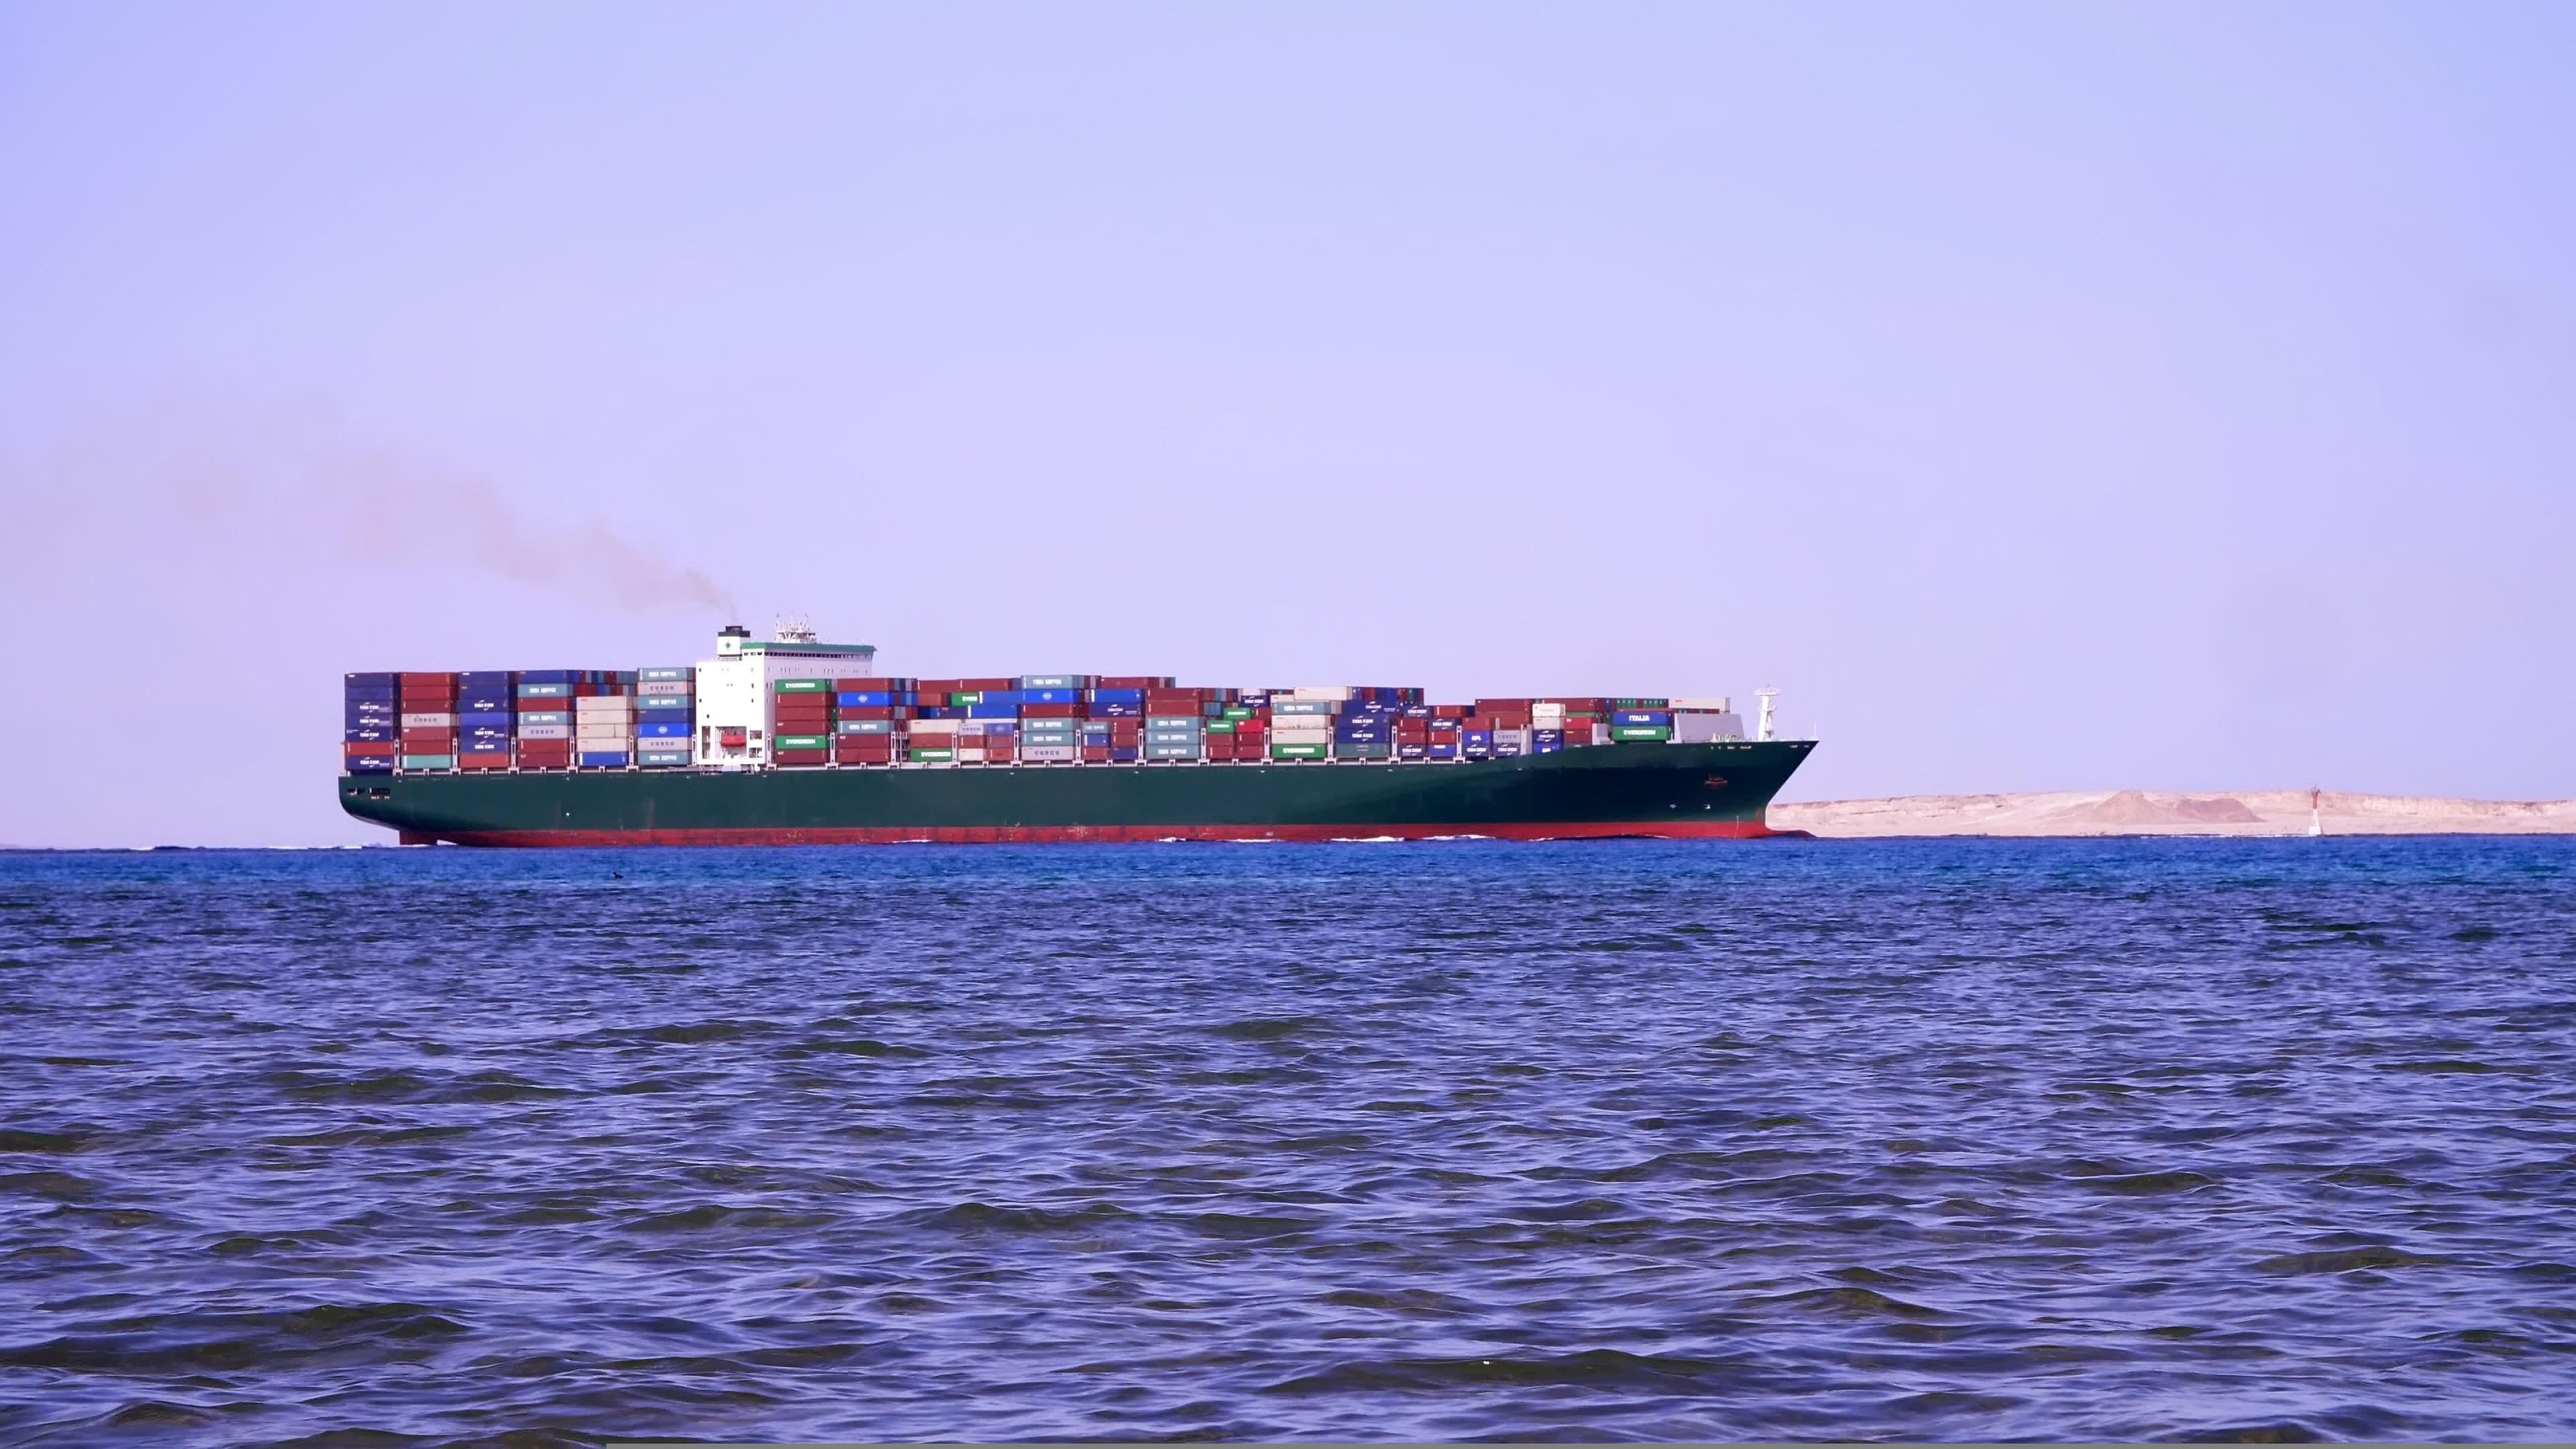 <div class="paragraphs"><p>Representative image showing a large cargo ship sailing on Red Sea.</p></div>